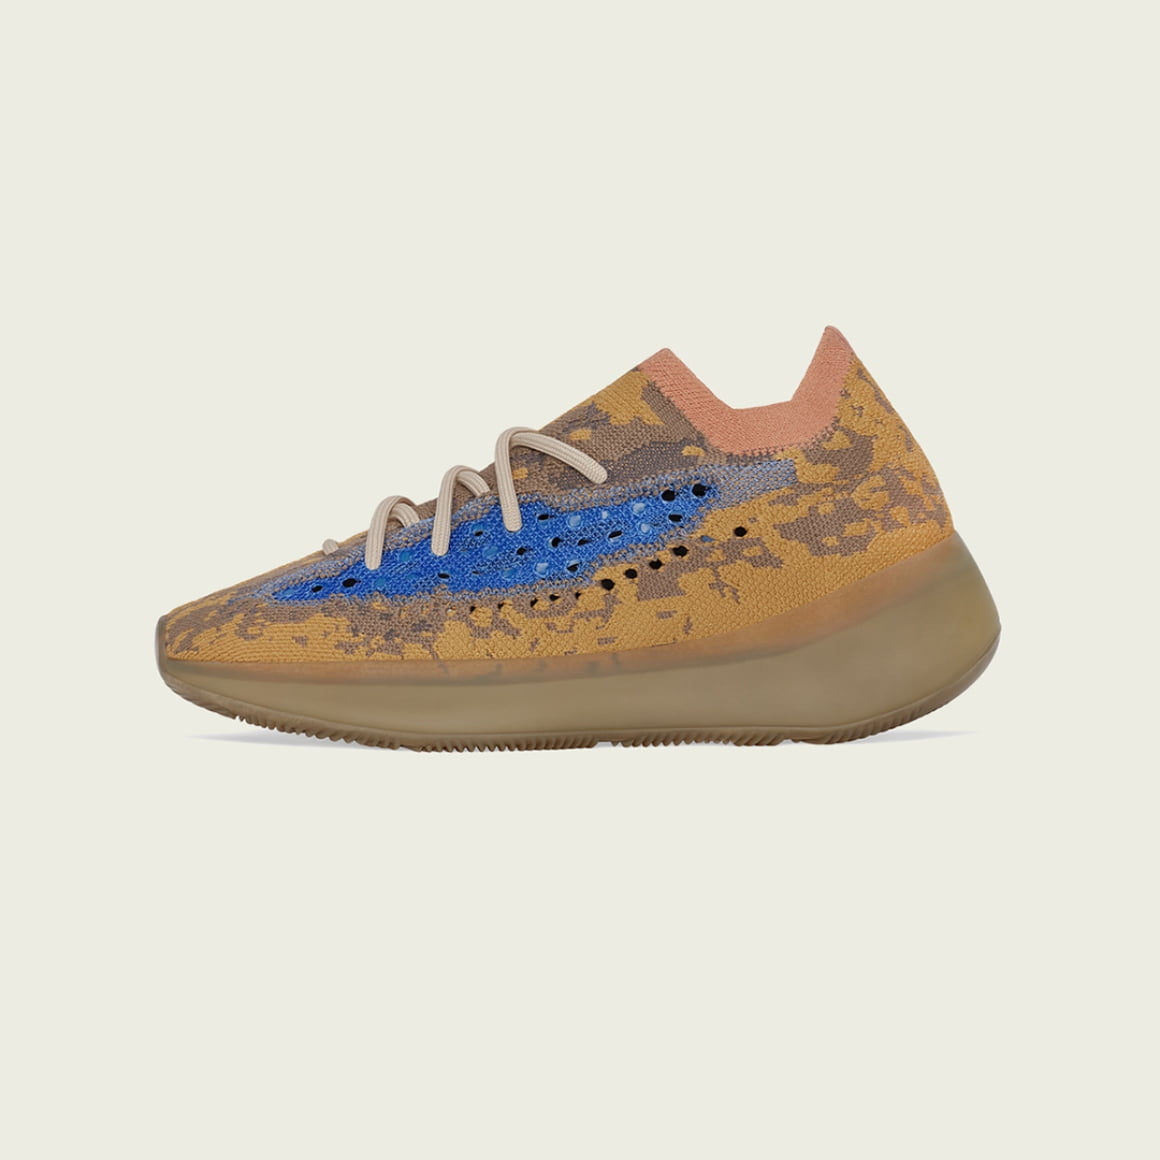 tan and blue yeezy